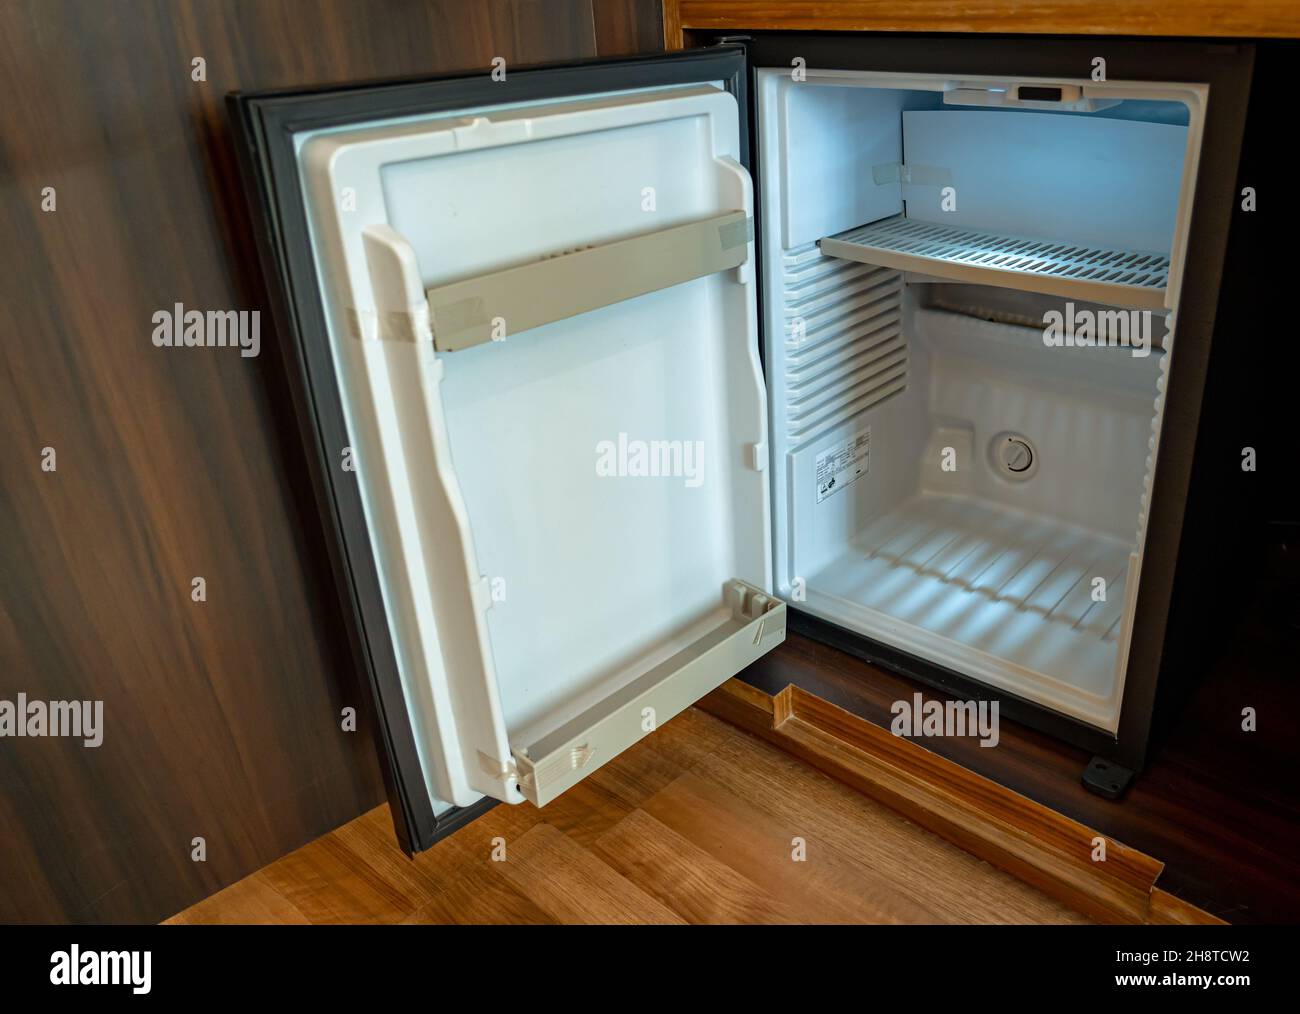 A small empty refrigerator with its door open. Stock Photo